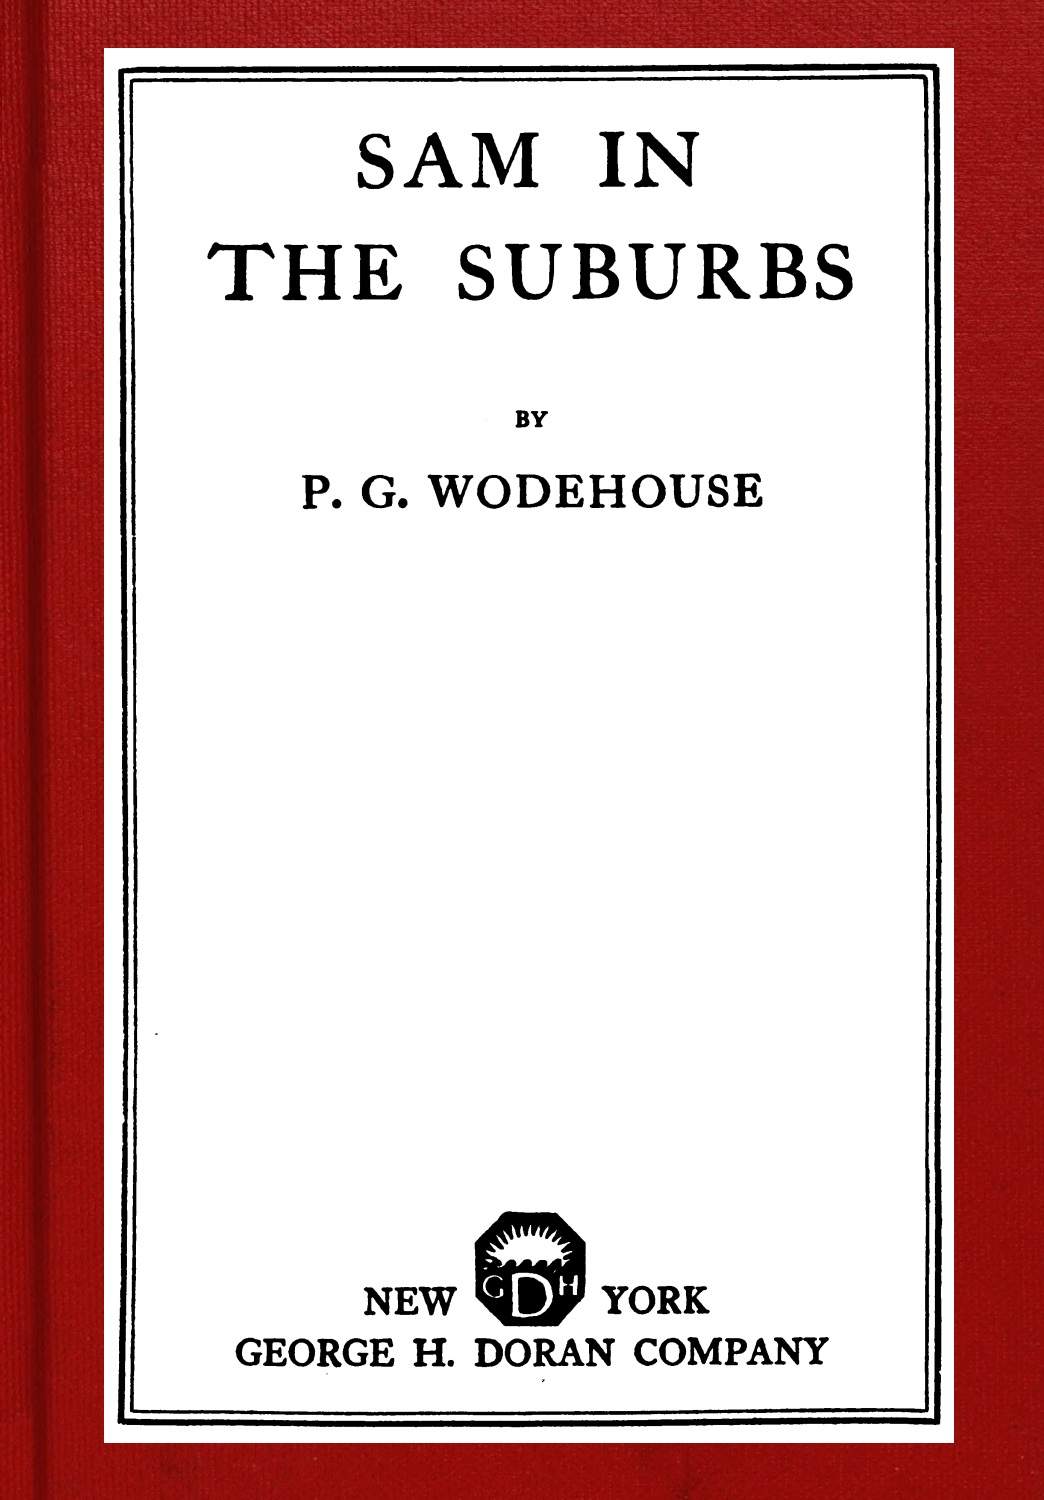 The Project Gutenberg eBook of Sam in the Suburbs, by P